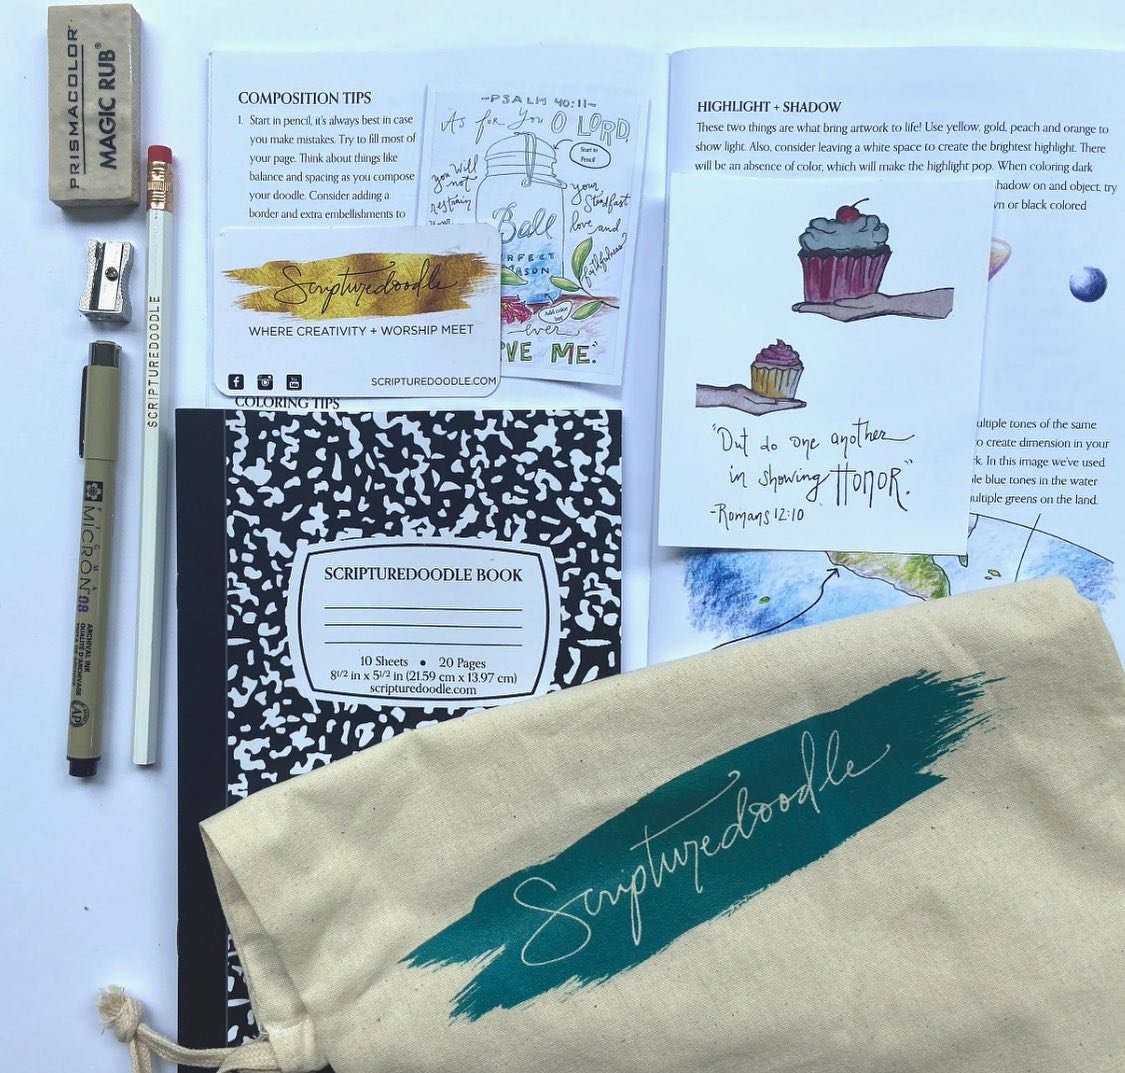 Our workshops are now available in digital format! 

Dive into the world of Scripturedoodle with our fun and beginner-friendly workshop. Learn the basics and unleash your creativity from the comfort of your own home!

Your purchase includes all digit